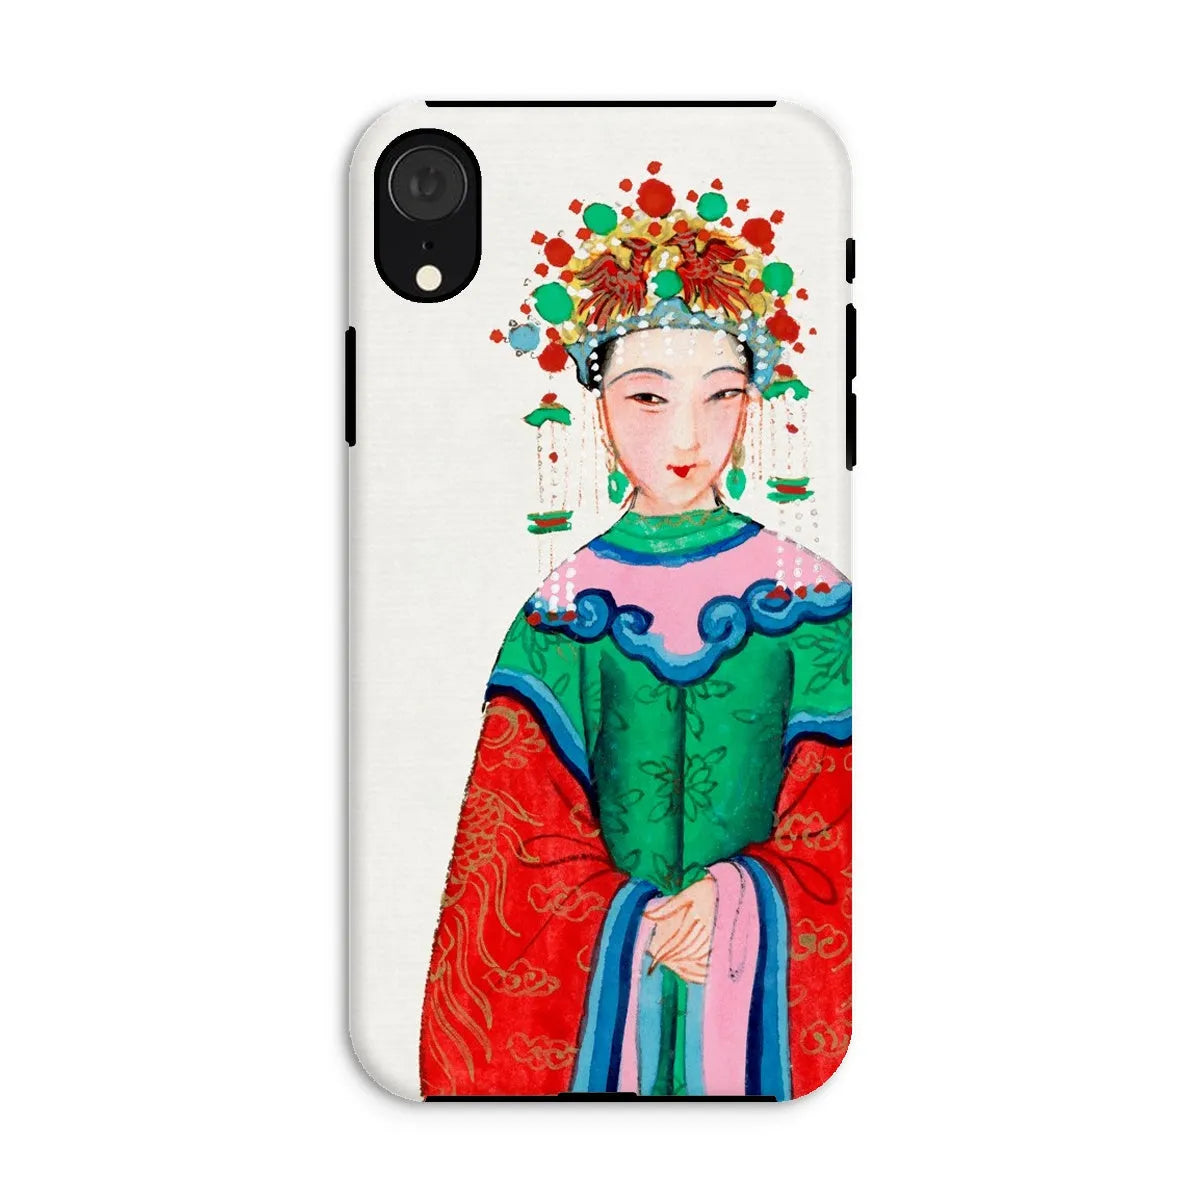 Imperial Princess - Chinese Aesthetic Painting Phone Case - Iphone Xr / Matte - Mobile Phone Cases - Aesthetic Art